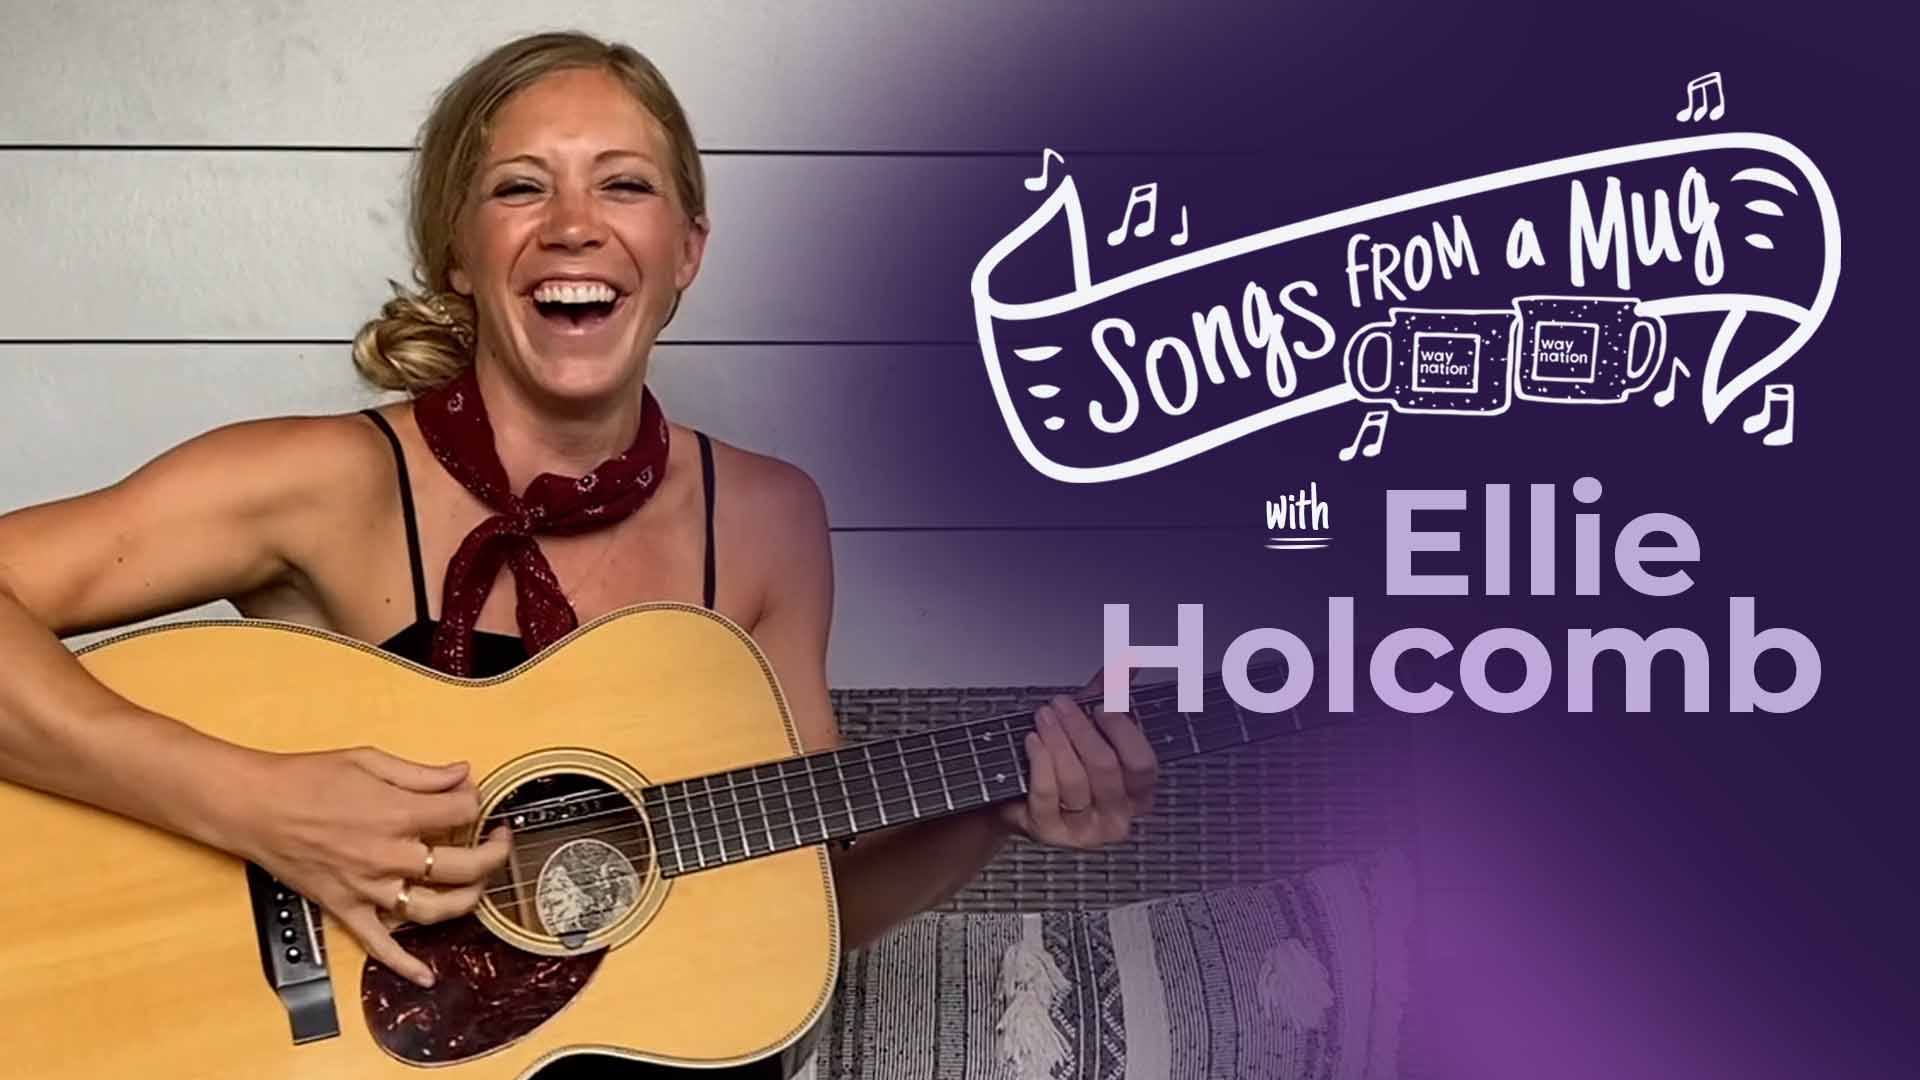 Ellie Holcomb Songs From a Mug